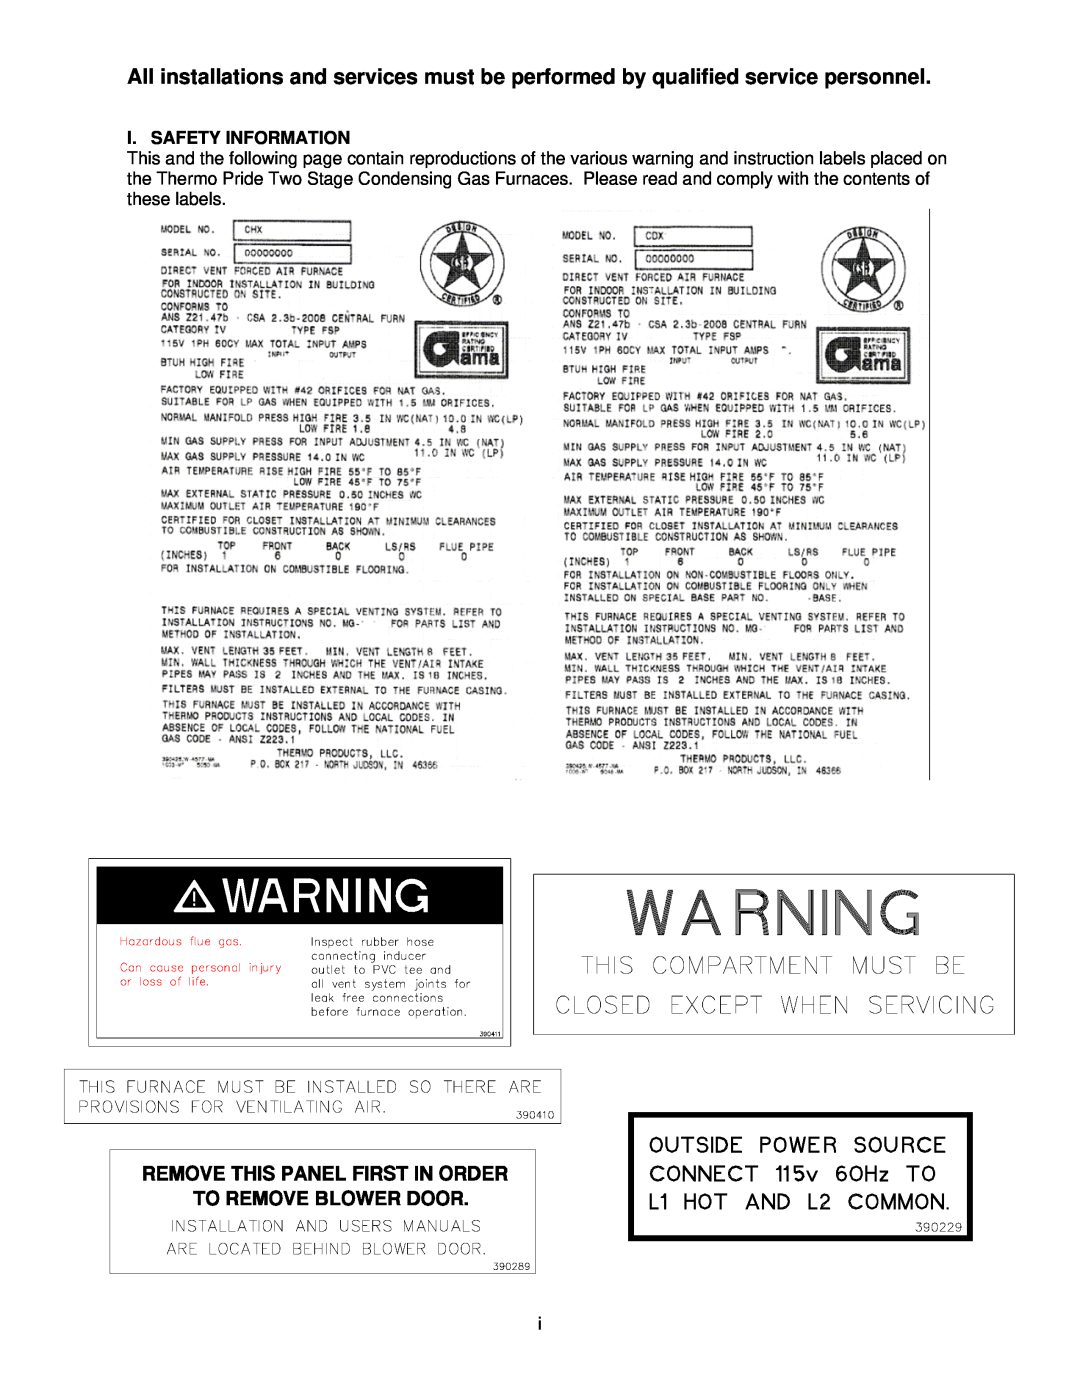 Thermo Products 125n, chx-3 75n, 100n operation manual I. Safety Information 